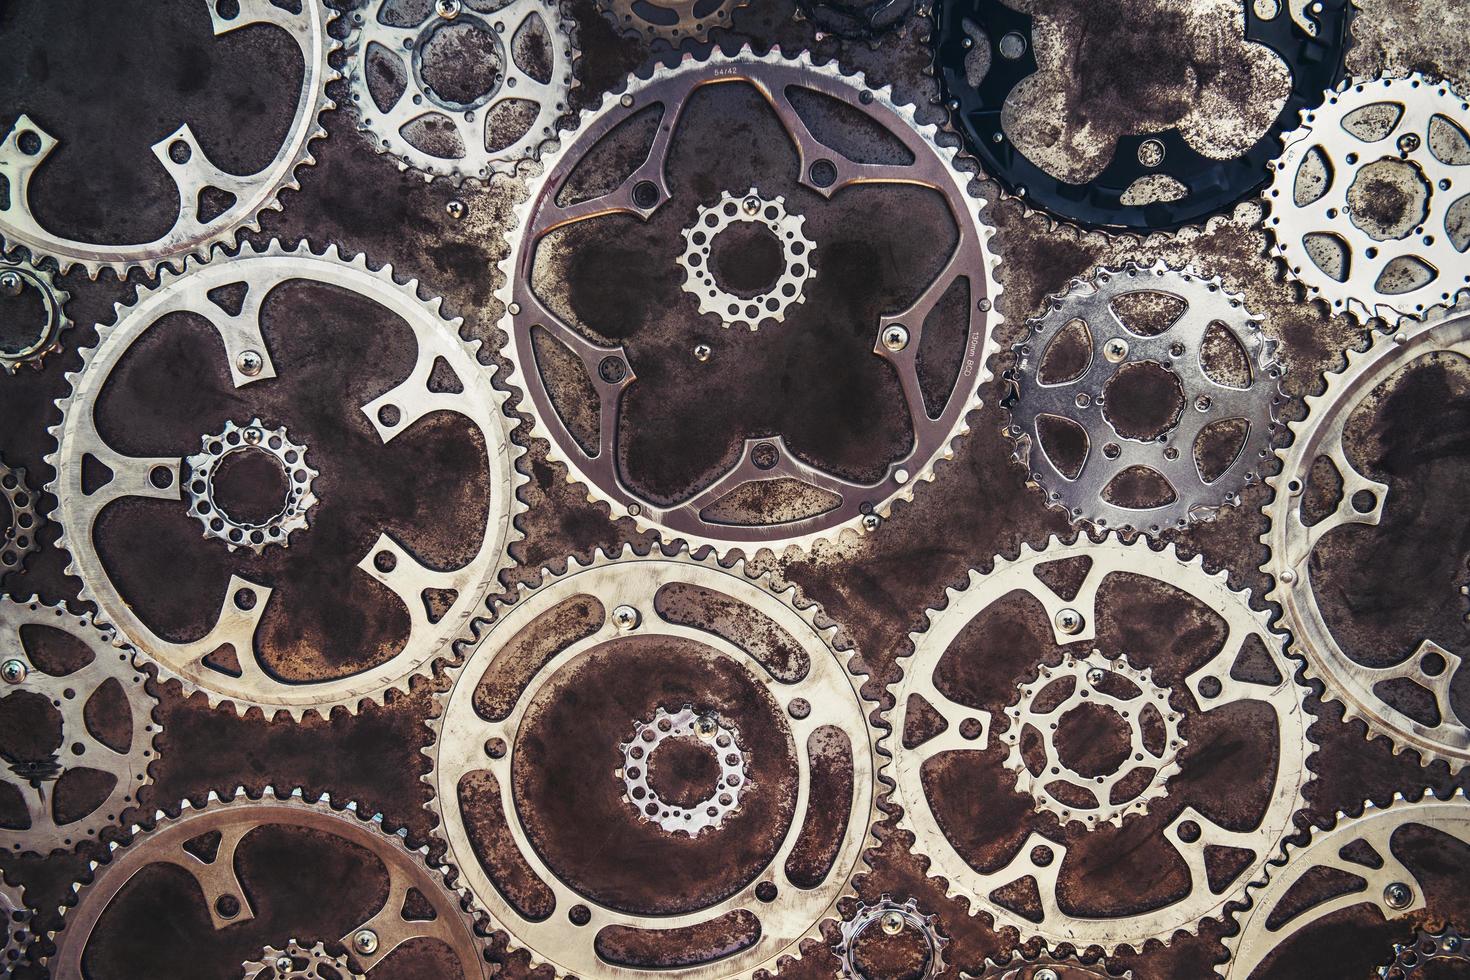 Cogs and gears photo